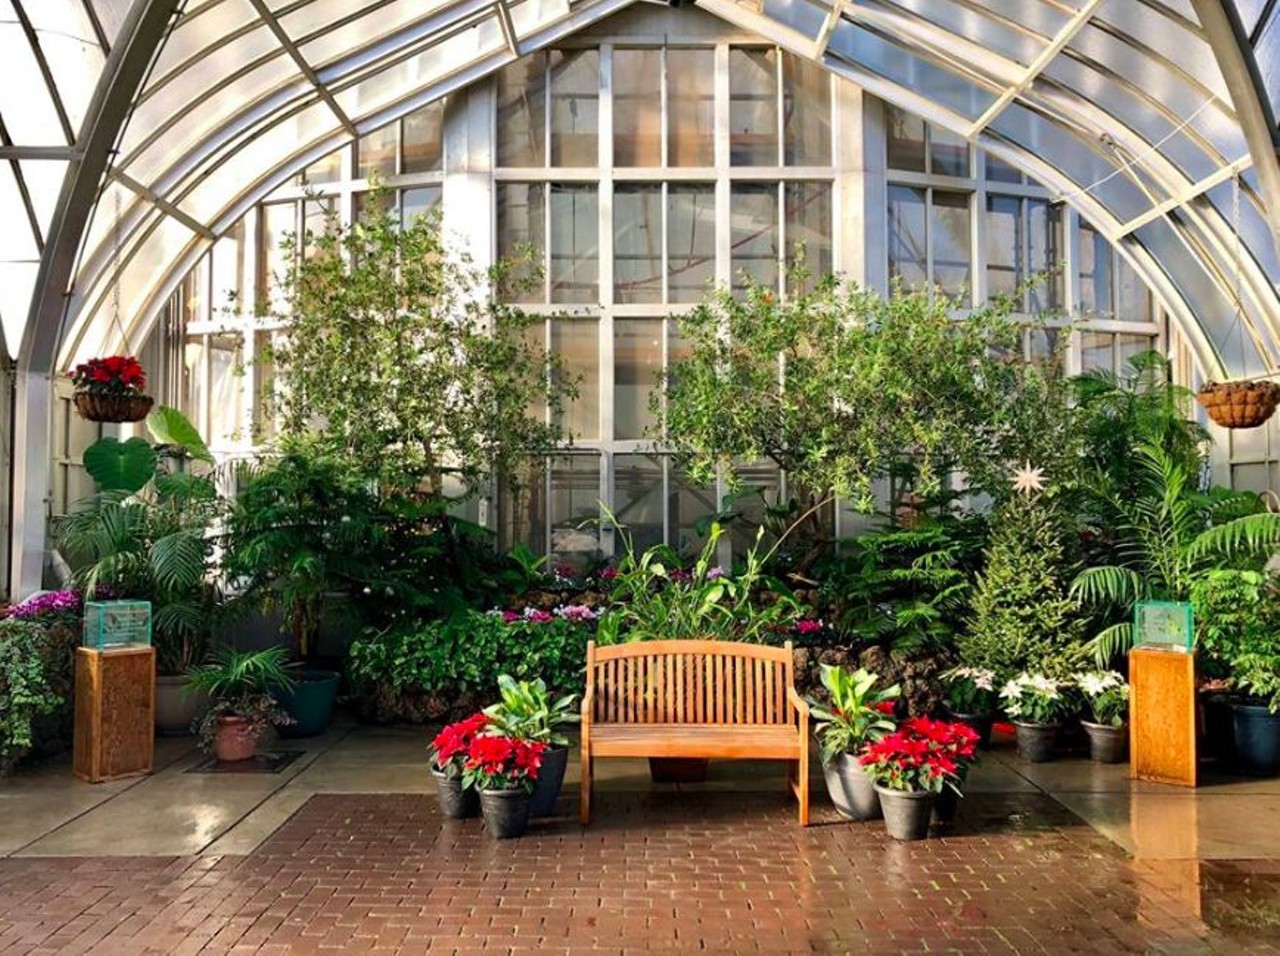 Anna Scripps Whitcomb Conservatory
4 Inselruhe Drive; 313-821-5428; belleisleconservancy.org
Designed by Albert Kahn and built in 1904, this intricately designed greenhouse holds collections of rare plants from around the world. The event space offers a picturesque backdrop to your vows.&nbsp;
Photo via Belle Isle Conservancy